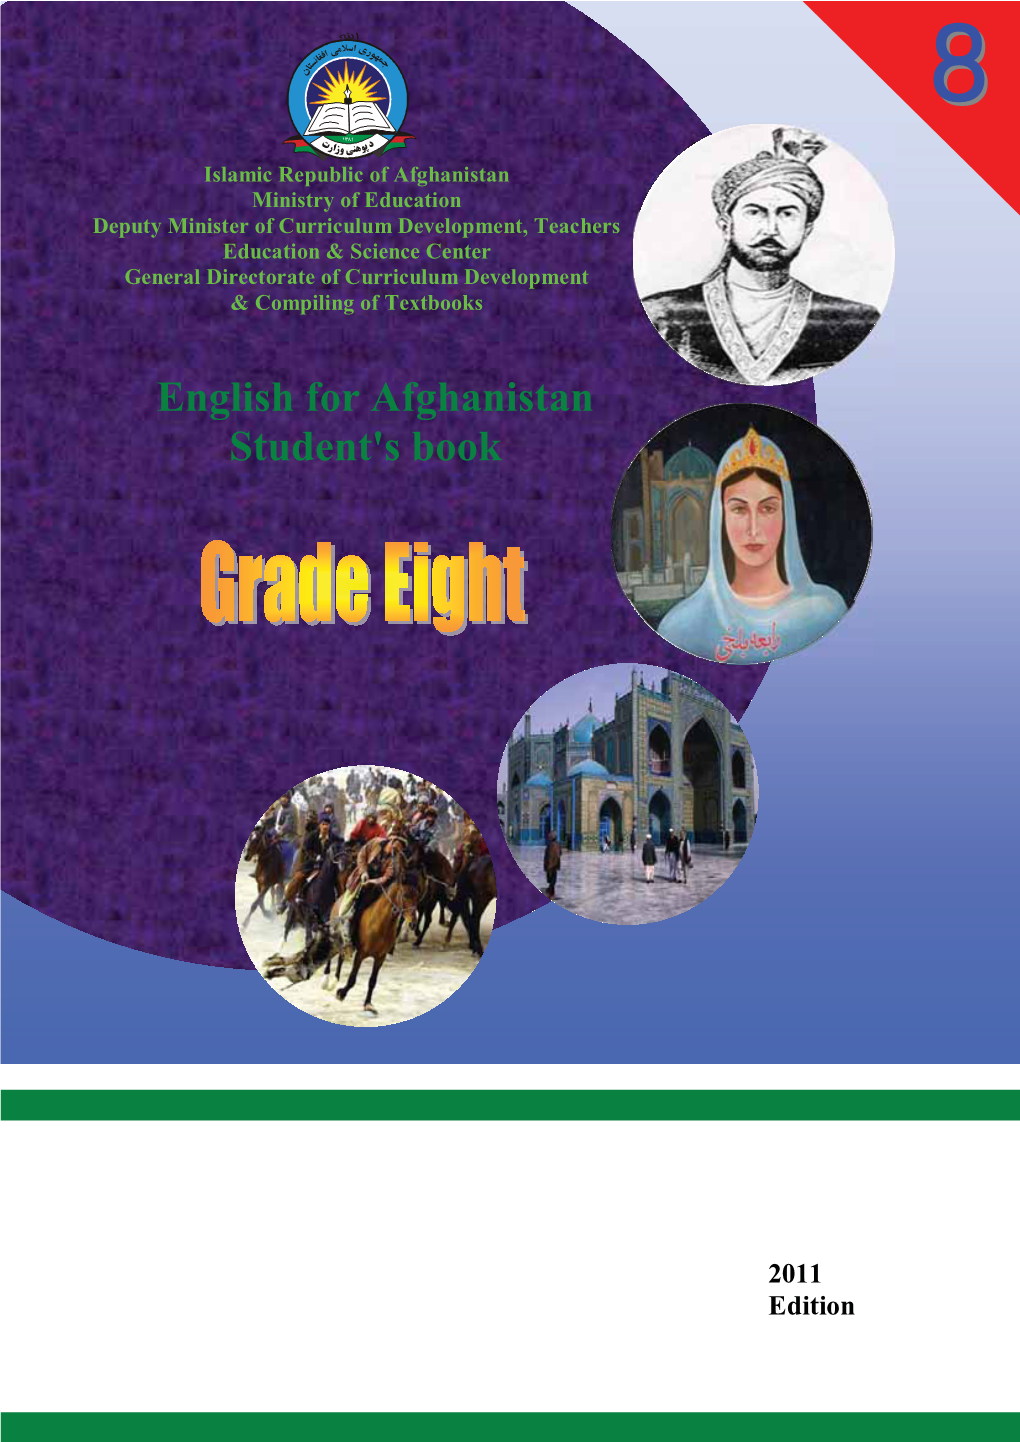 English for Afghanistan Student's Book